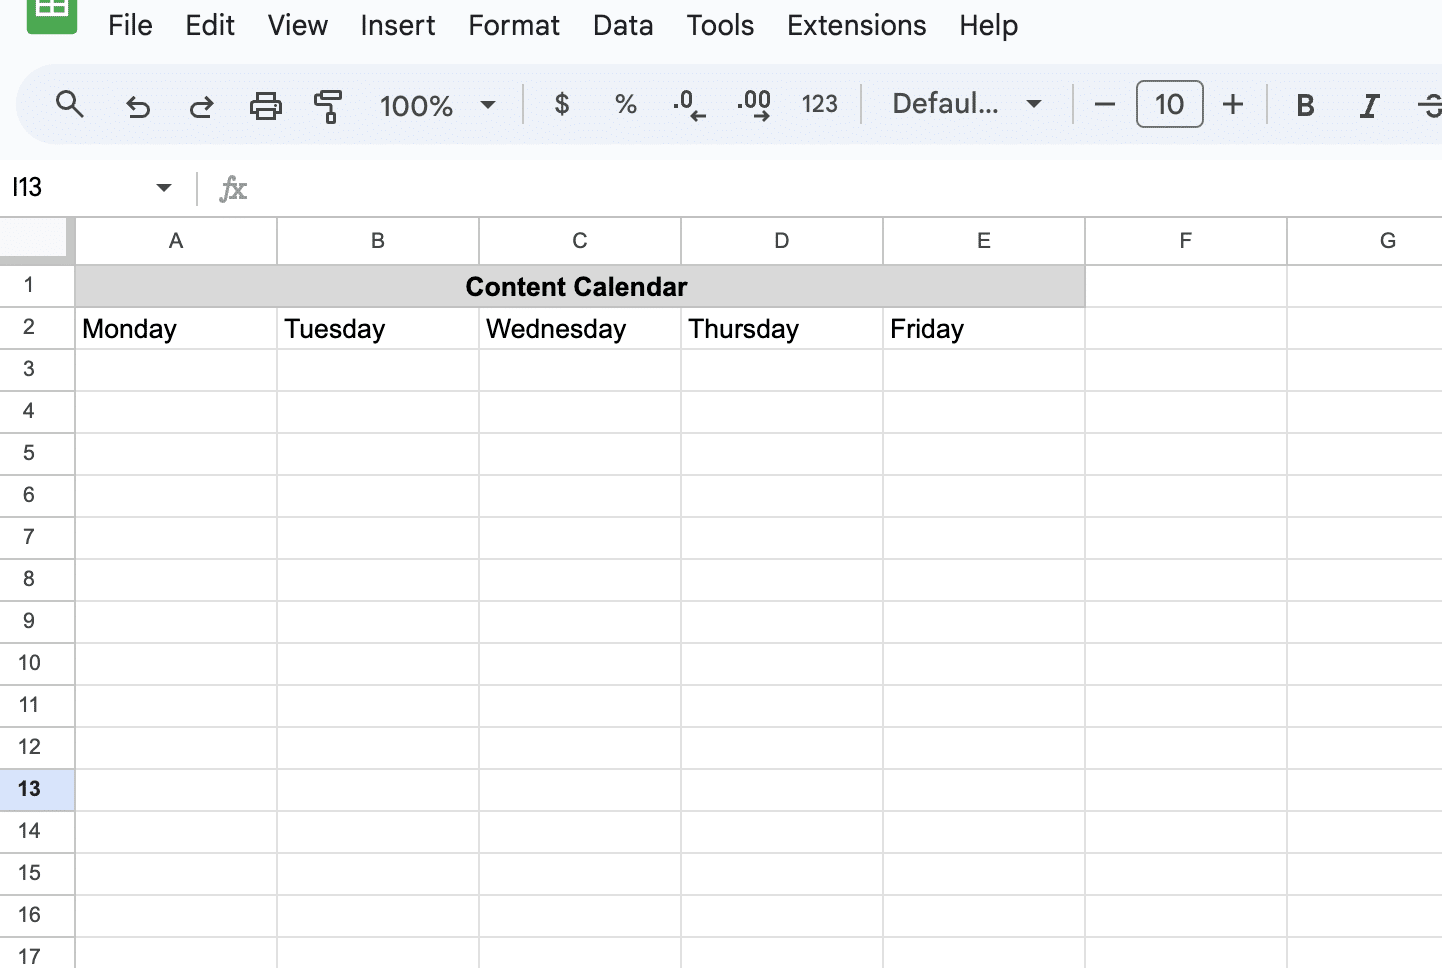 Labeling weekdays in the Google Sheets calendar.